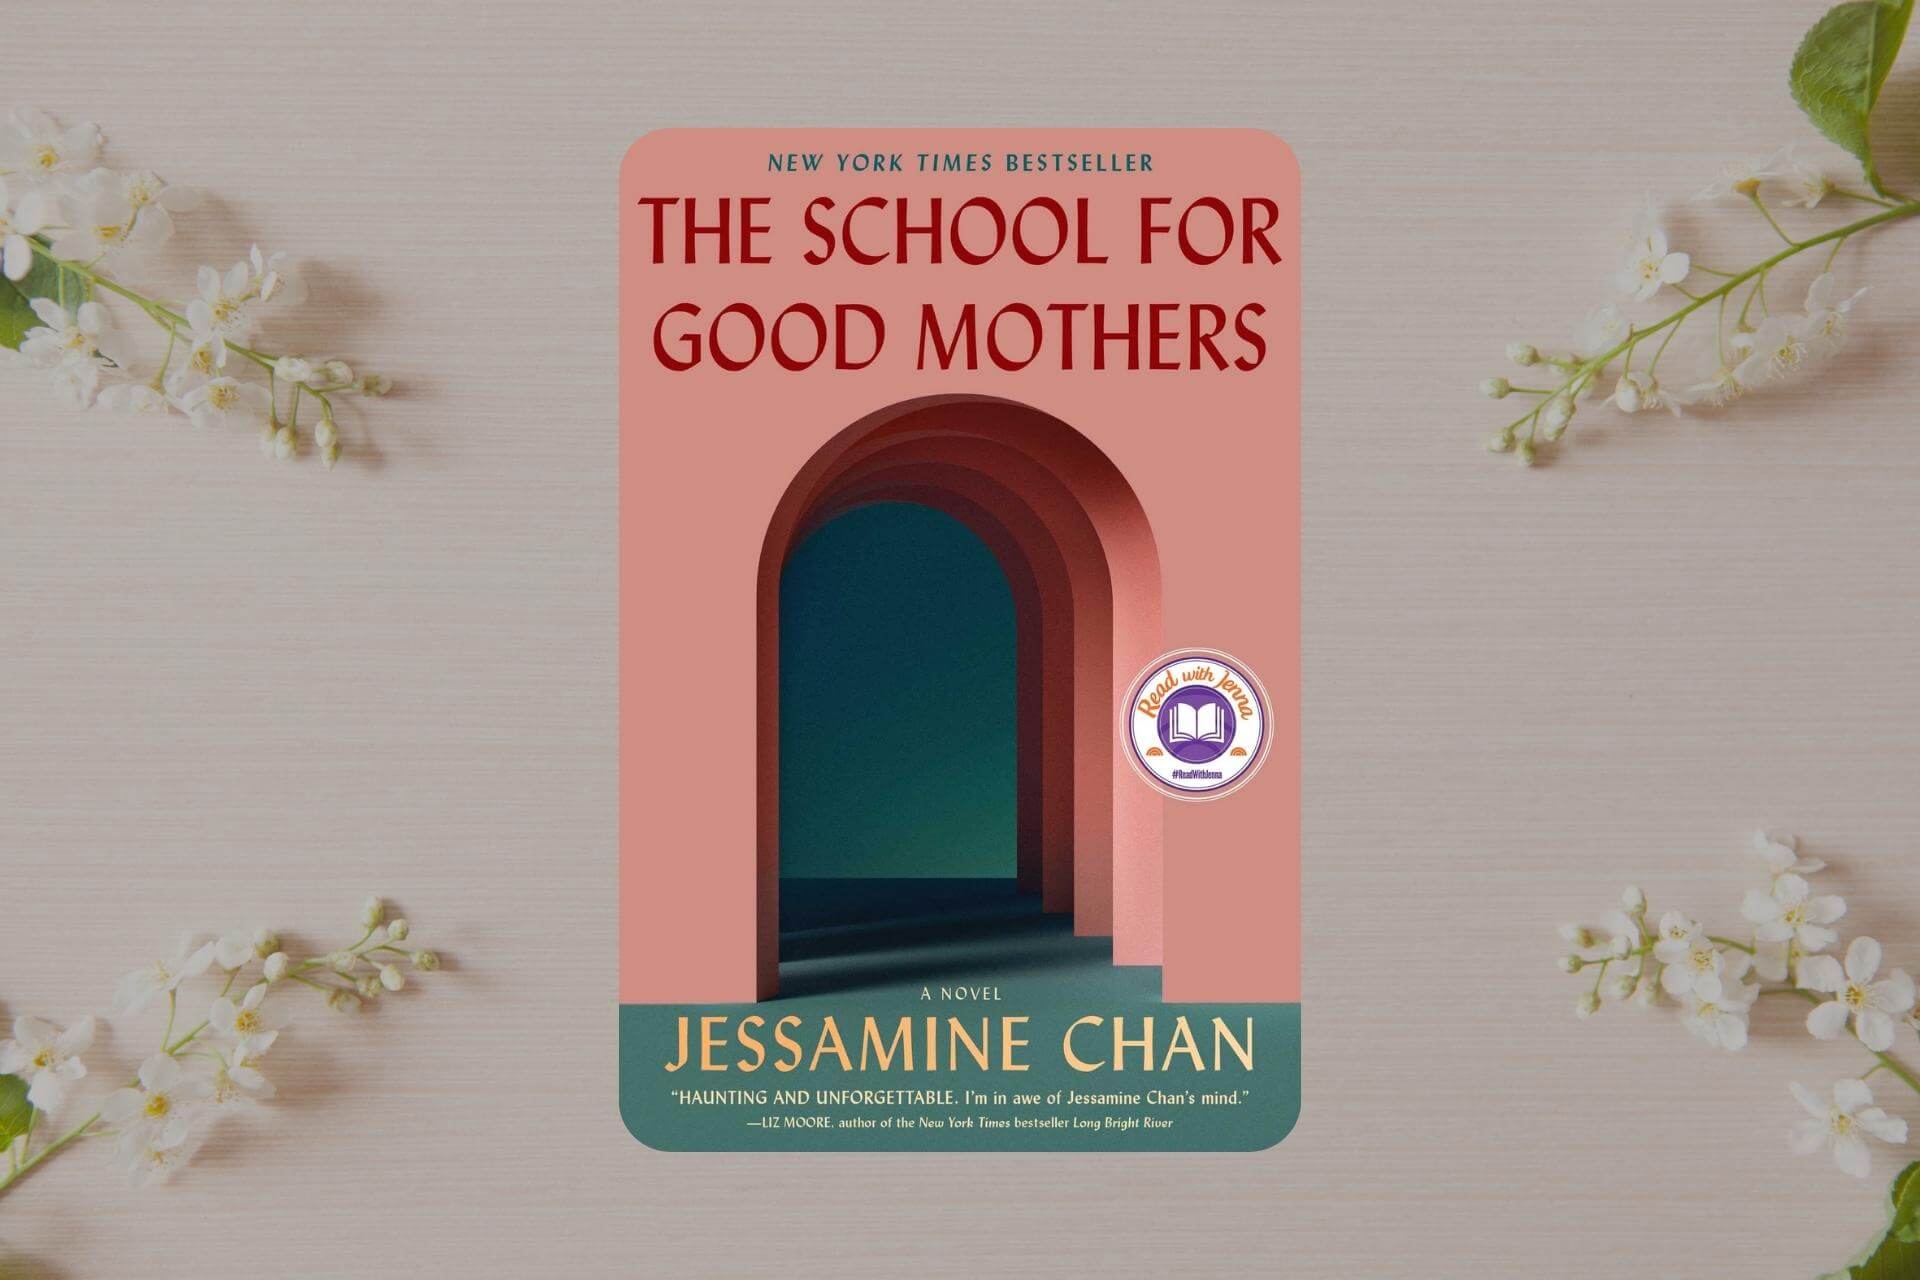 Book Club Questions for The School for Good Mothers by Jessamine Chan